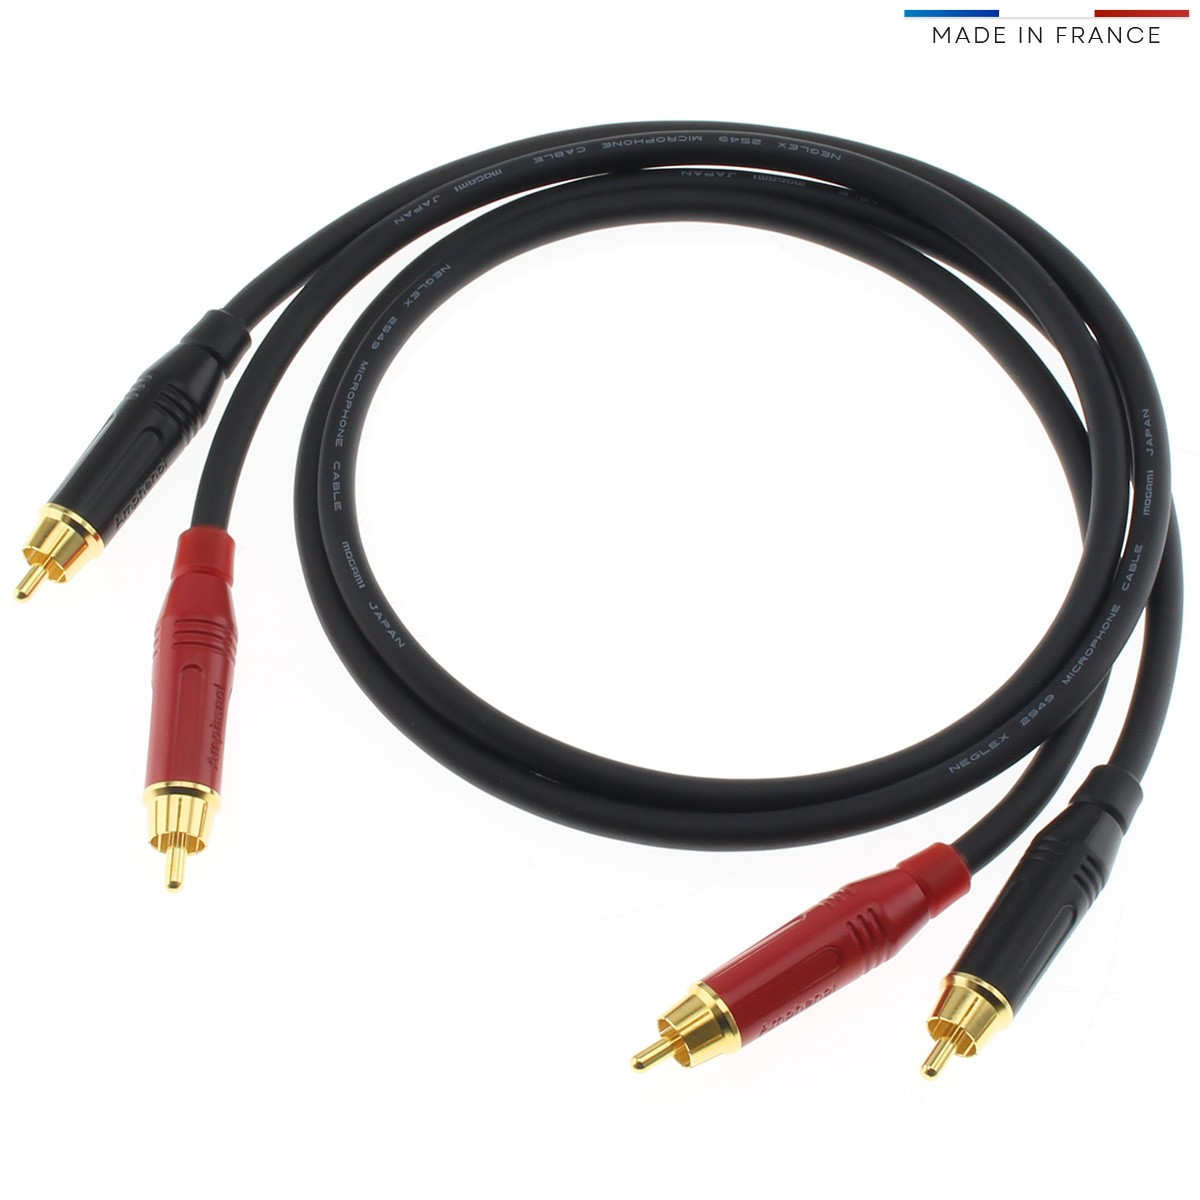 AUDIOPHONICS WIRE Interconnect Cable Stereo RCA OFC Copper Gold Plated 3m